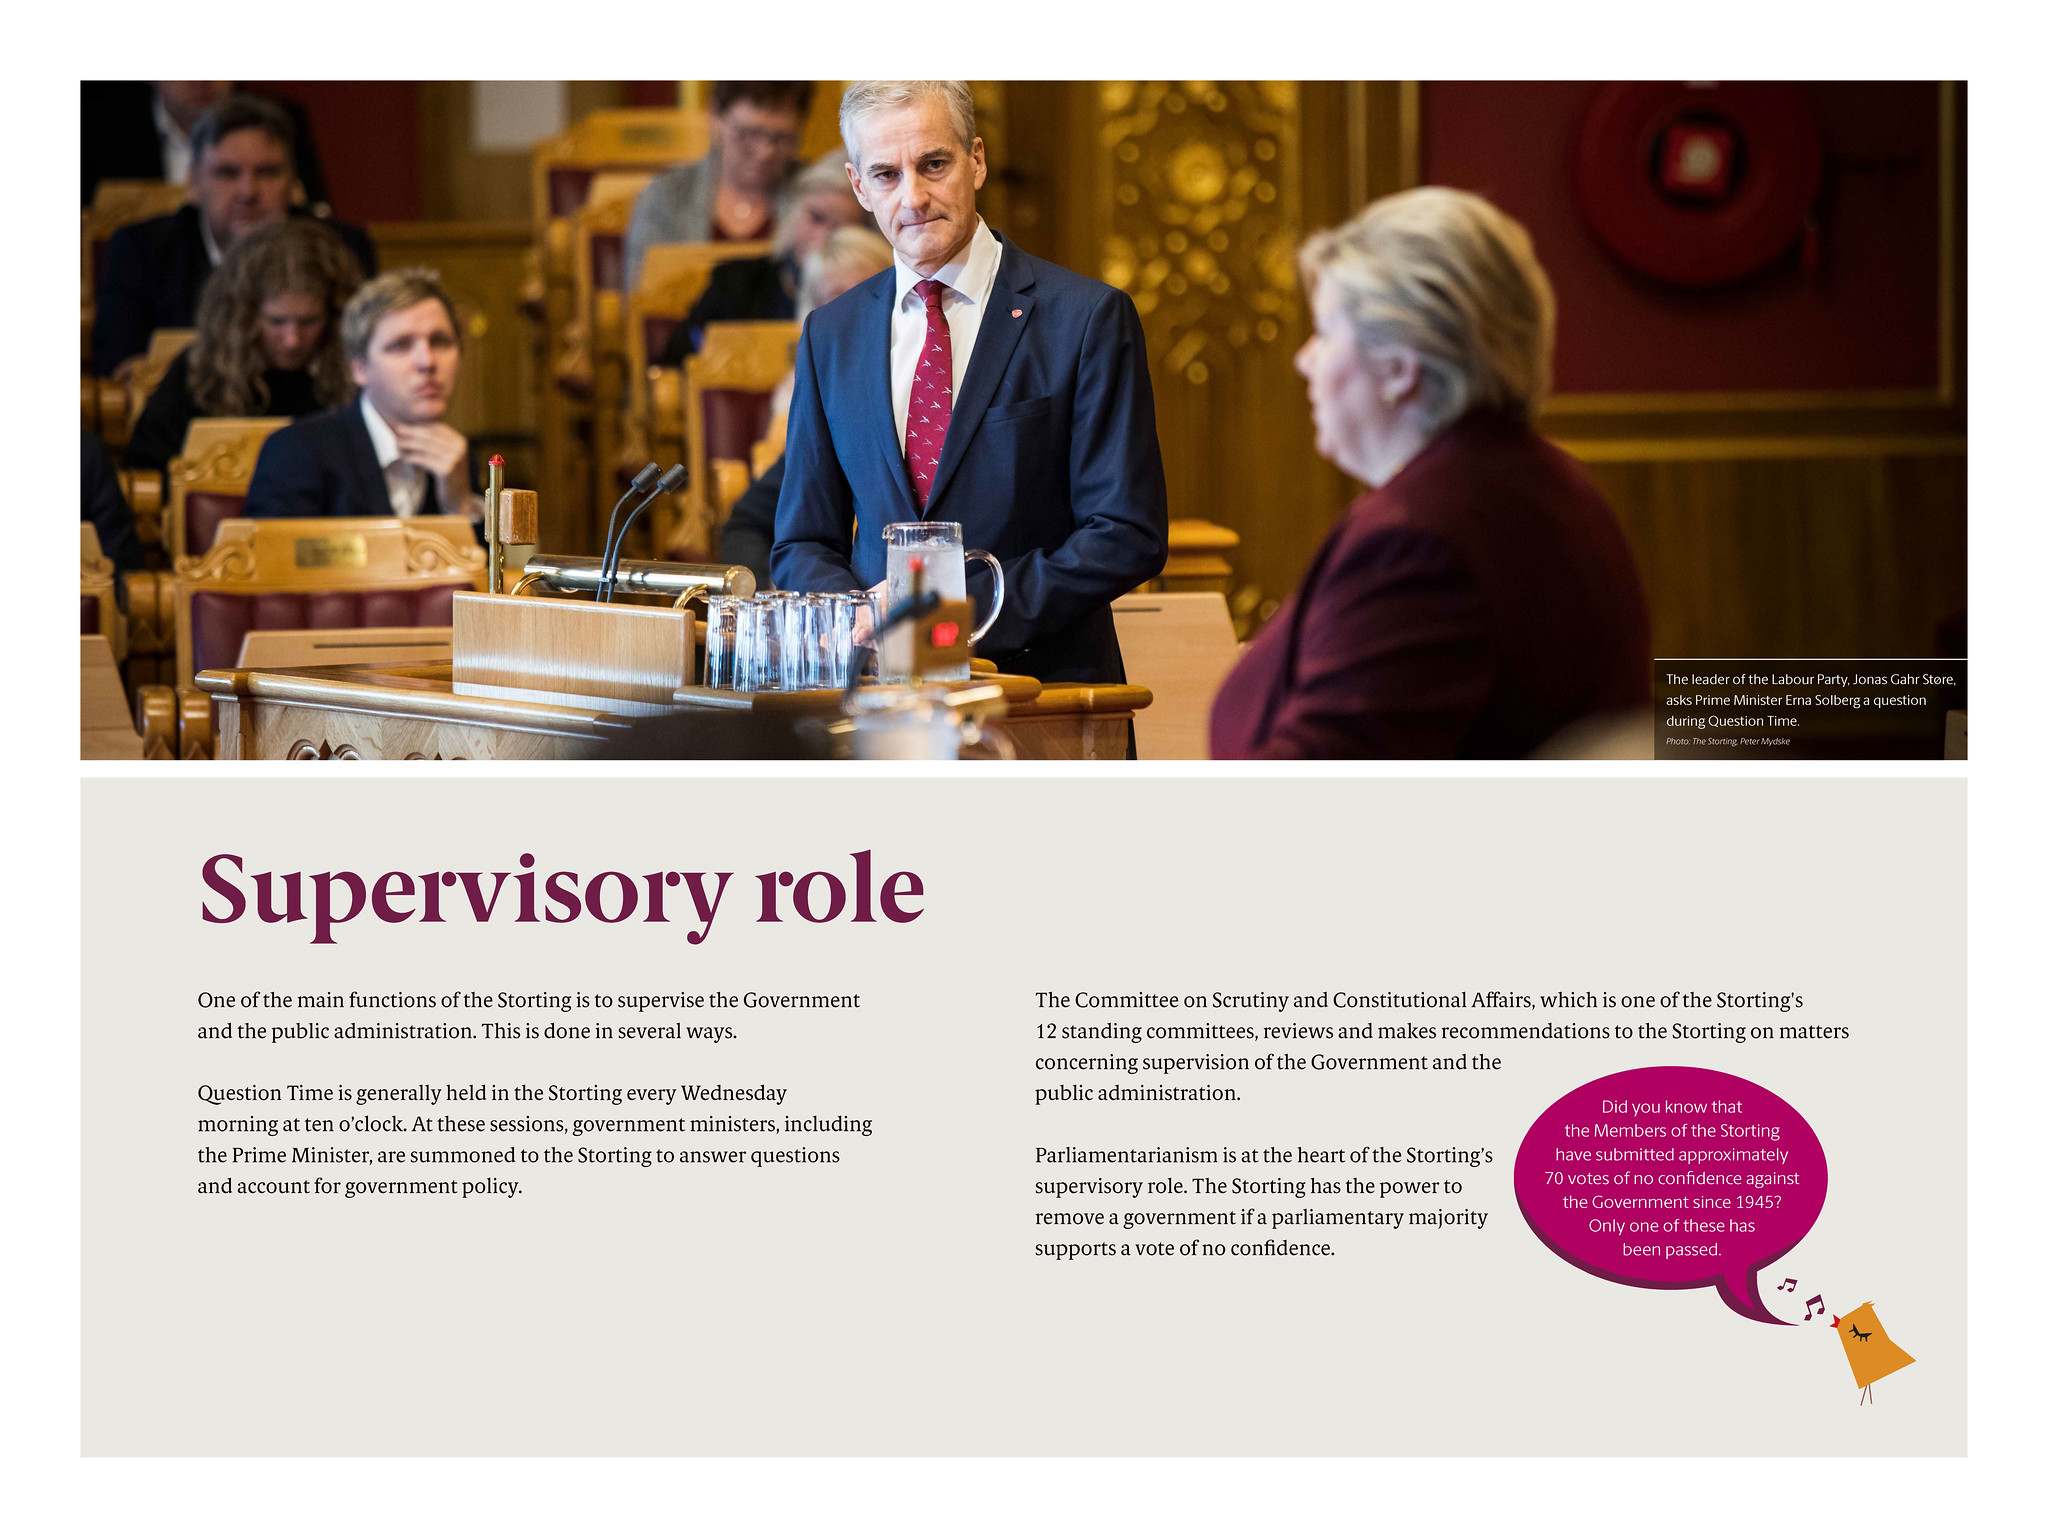 Poster describing the Stortings supervisory role